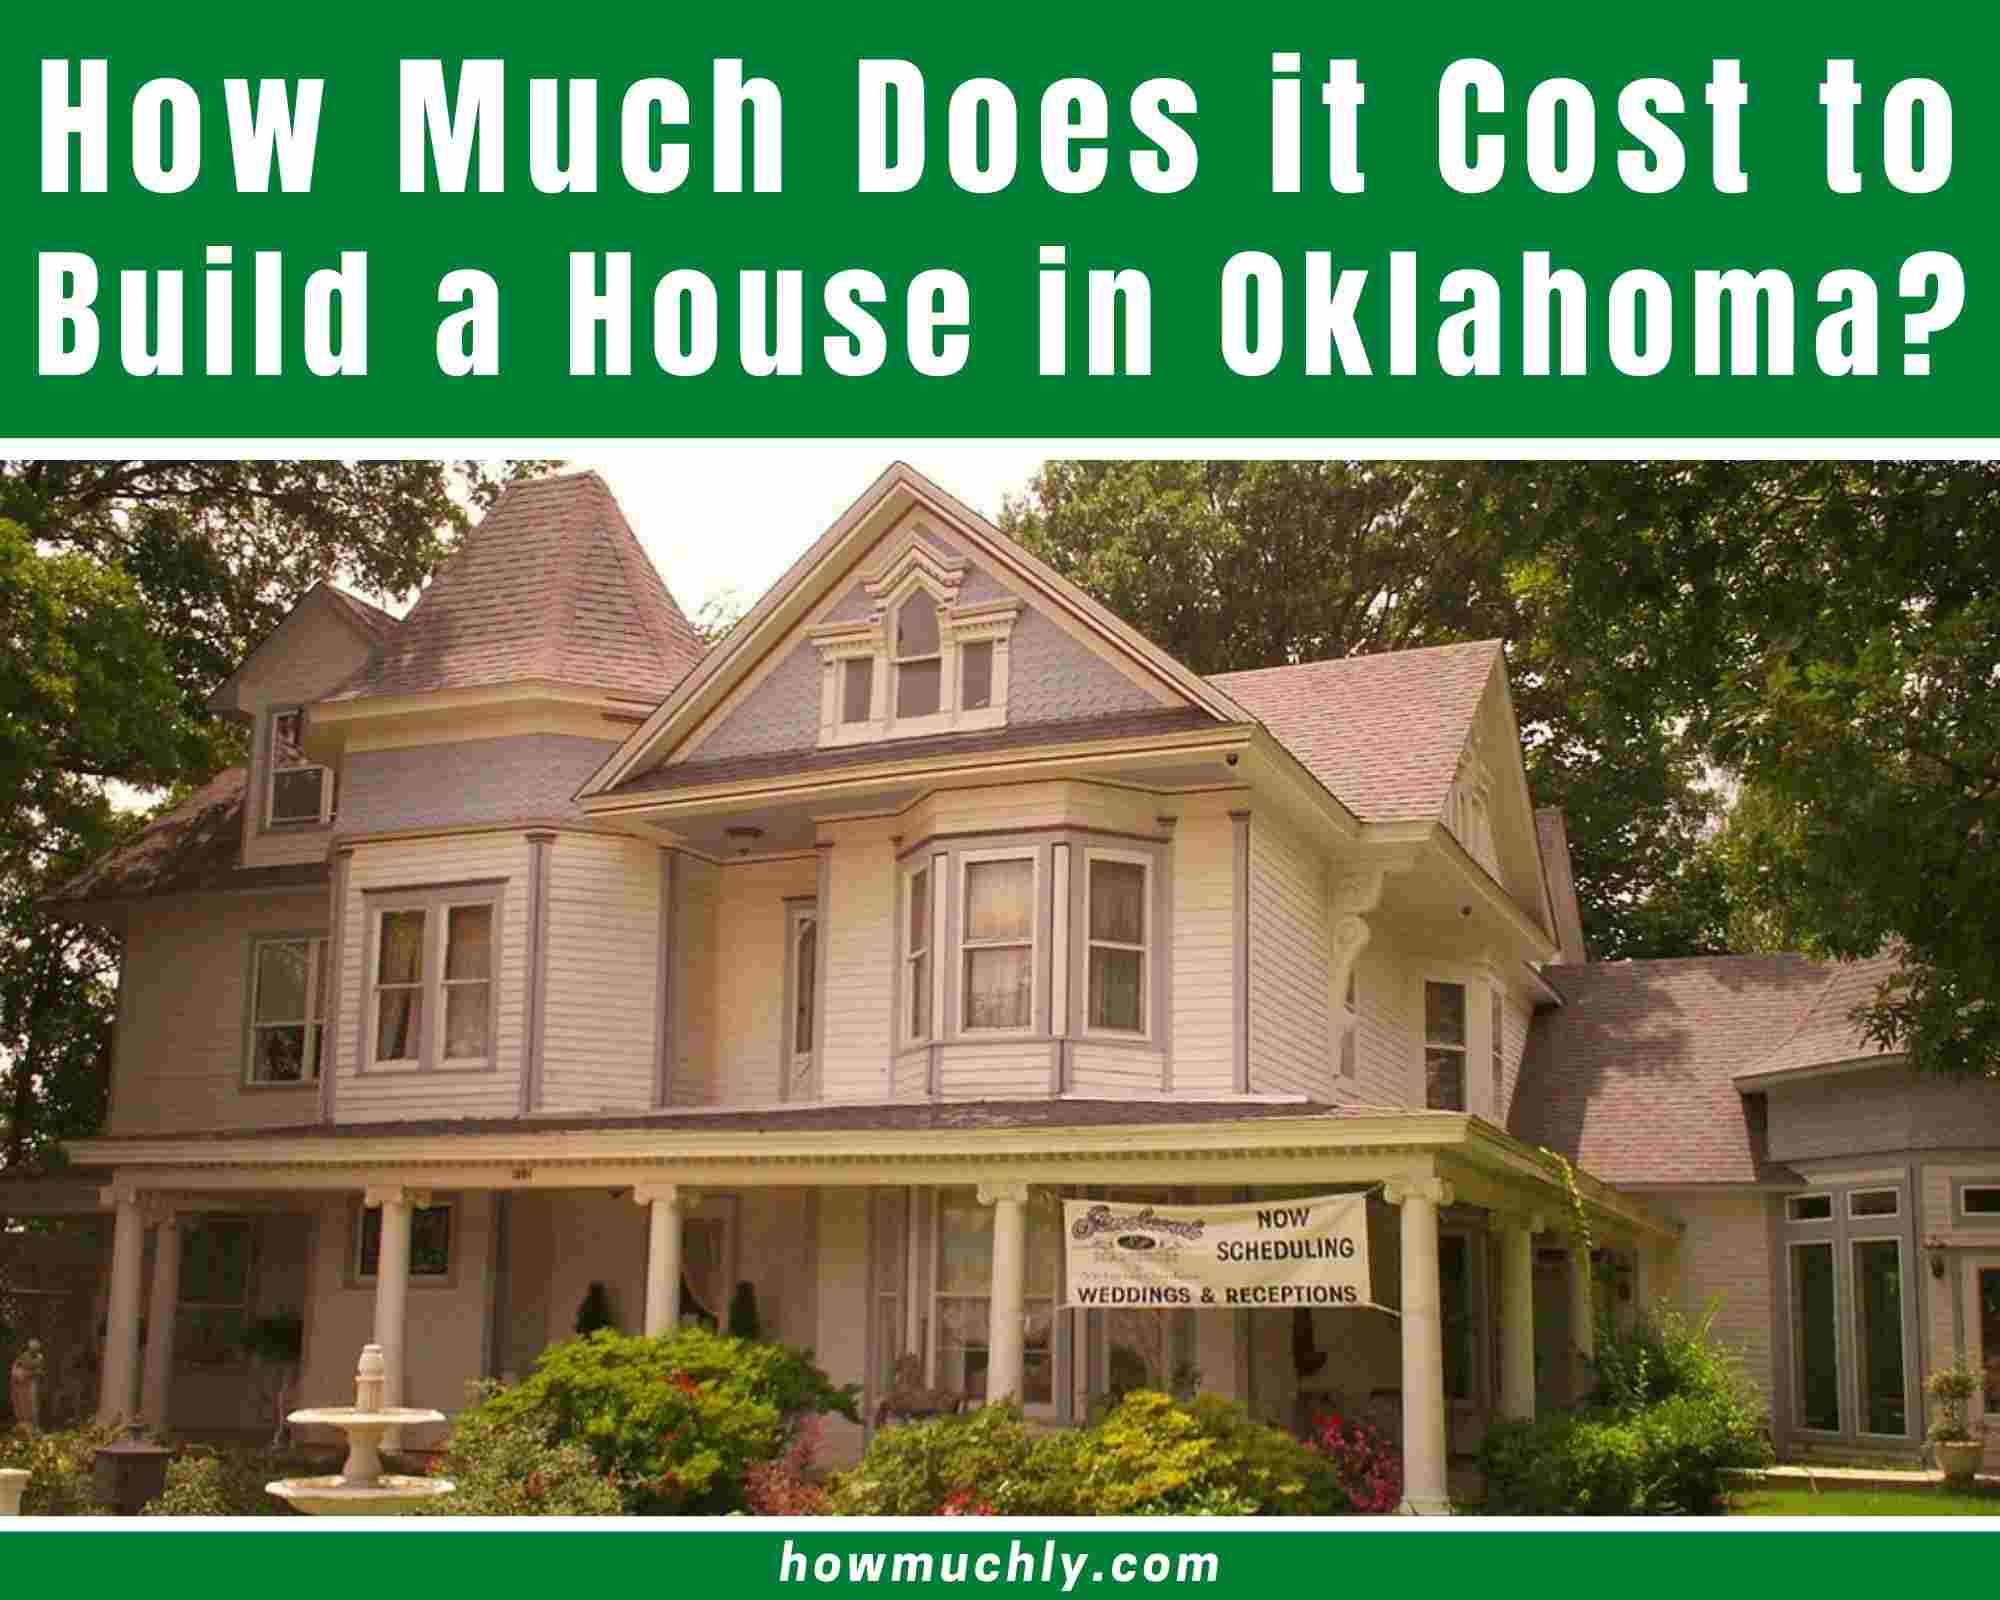 How much does it cost to build a house oklahoma kobo building